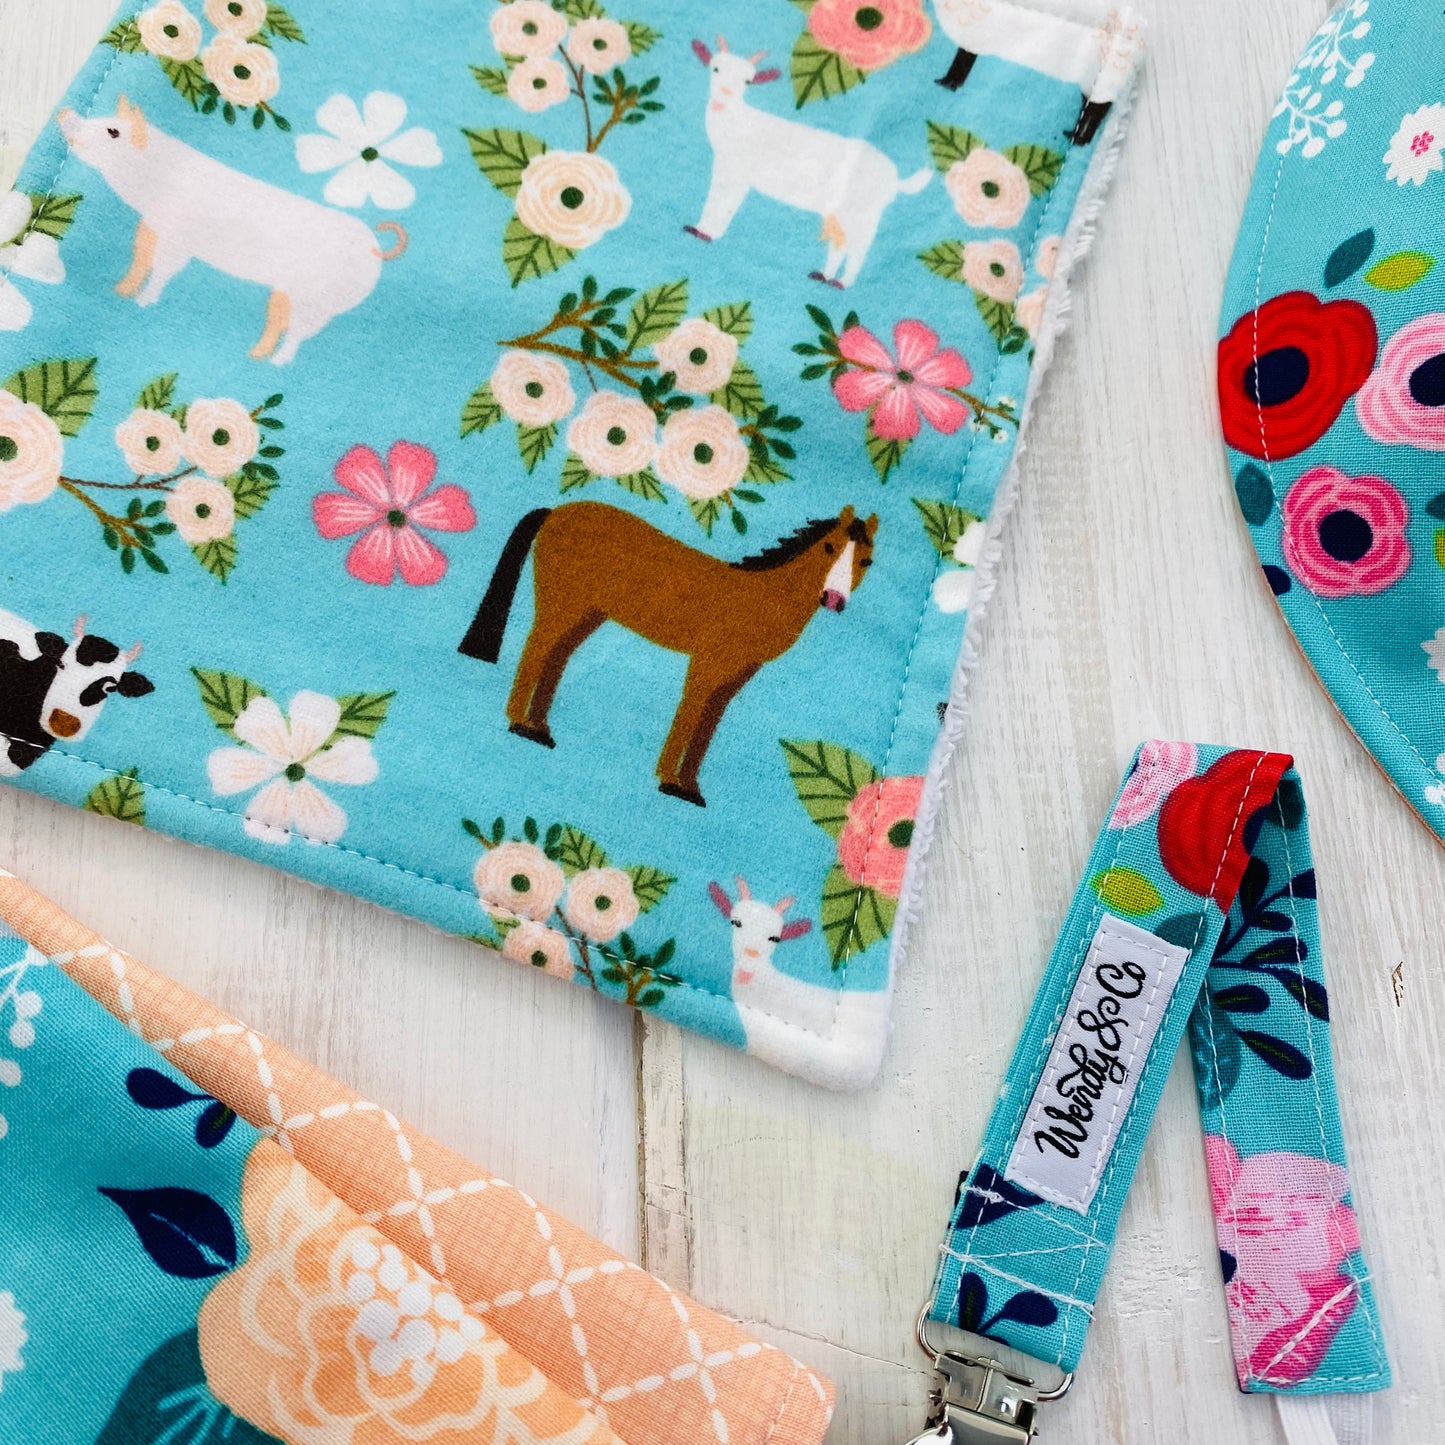 Cow, horse, pig on bright floral fabric.